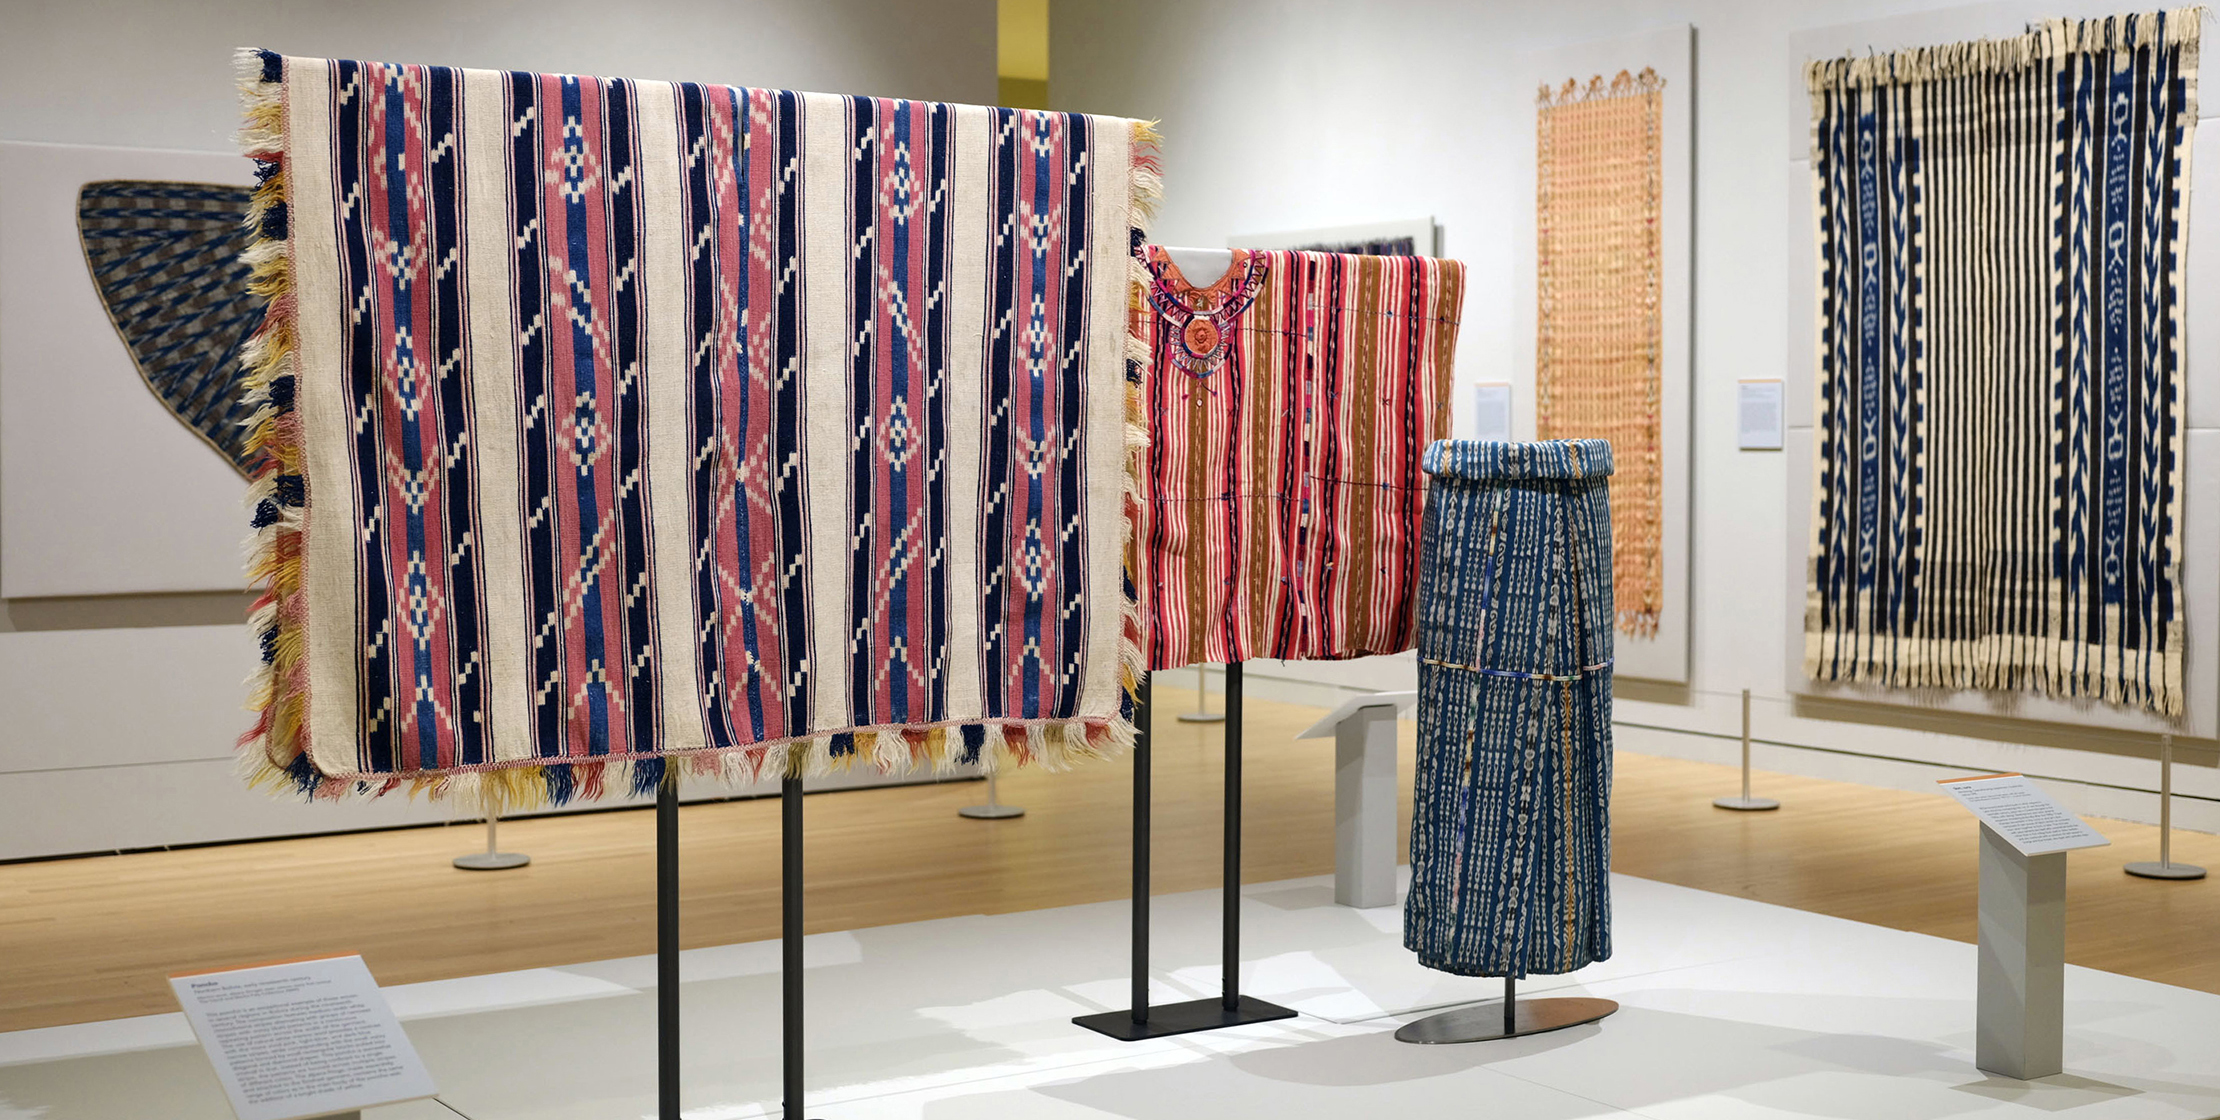 A display of colorful ikat textiles from the Americas